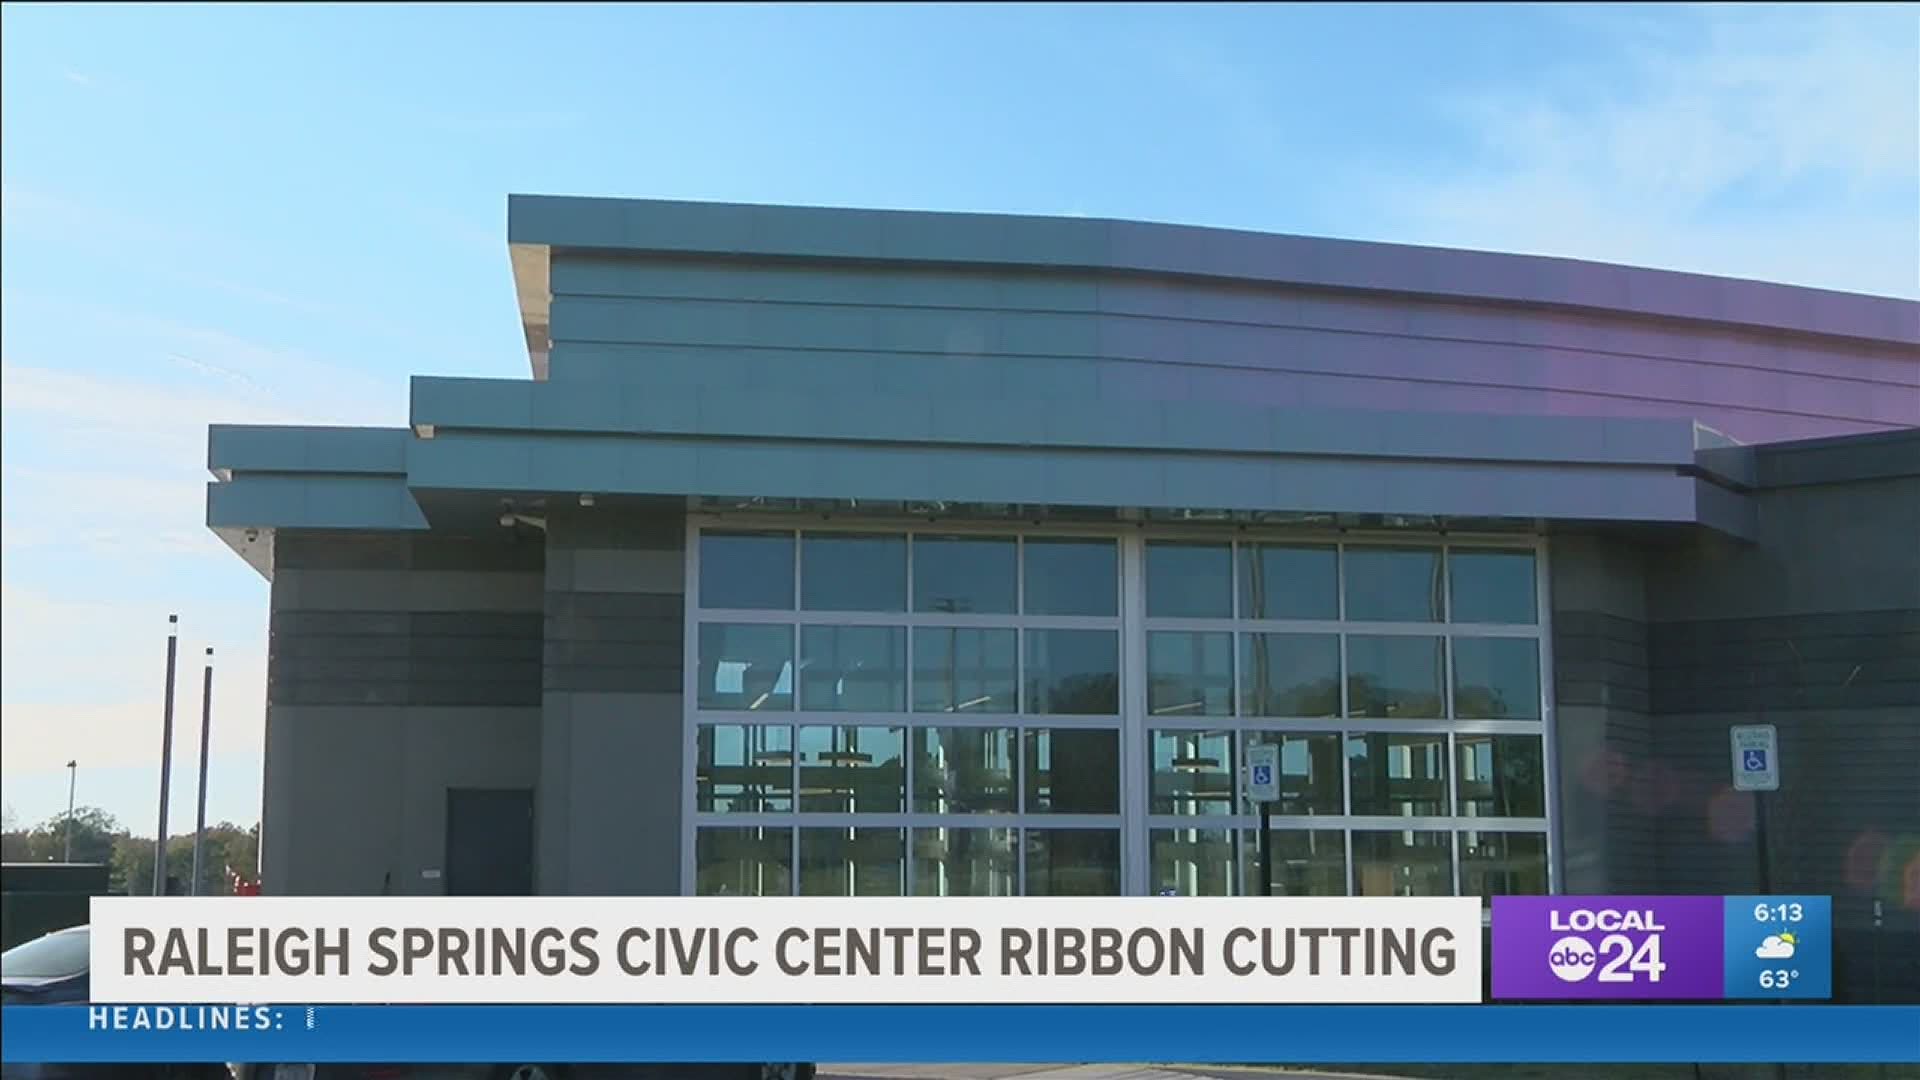 The $45 million project began in 2018 and replaces what was once the Raleigh Springs Mall.